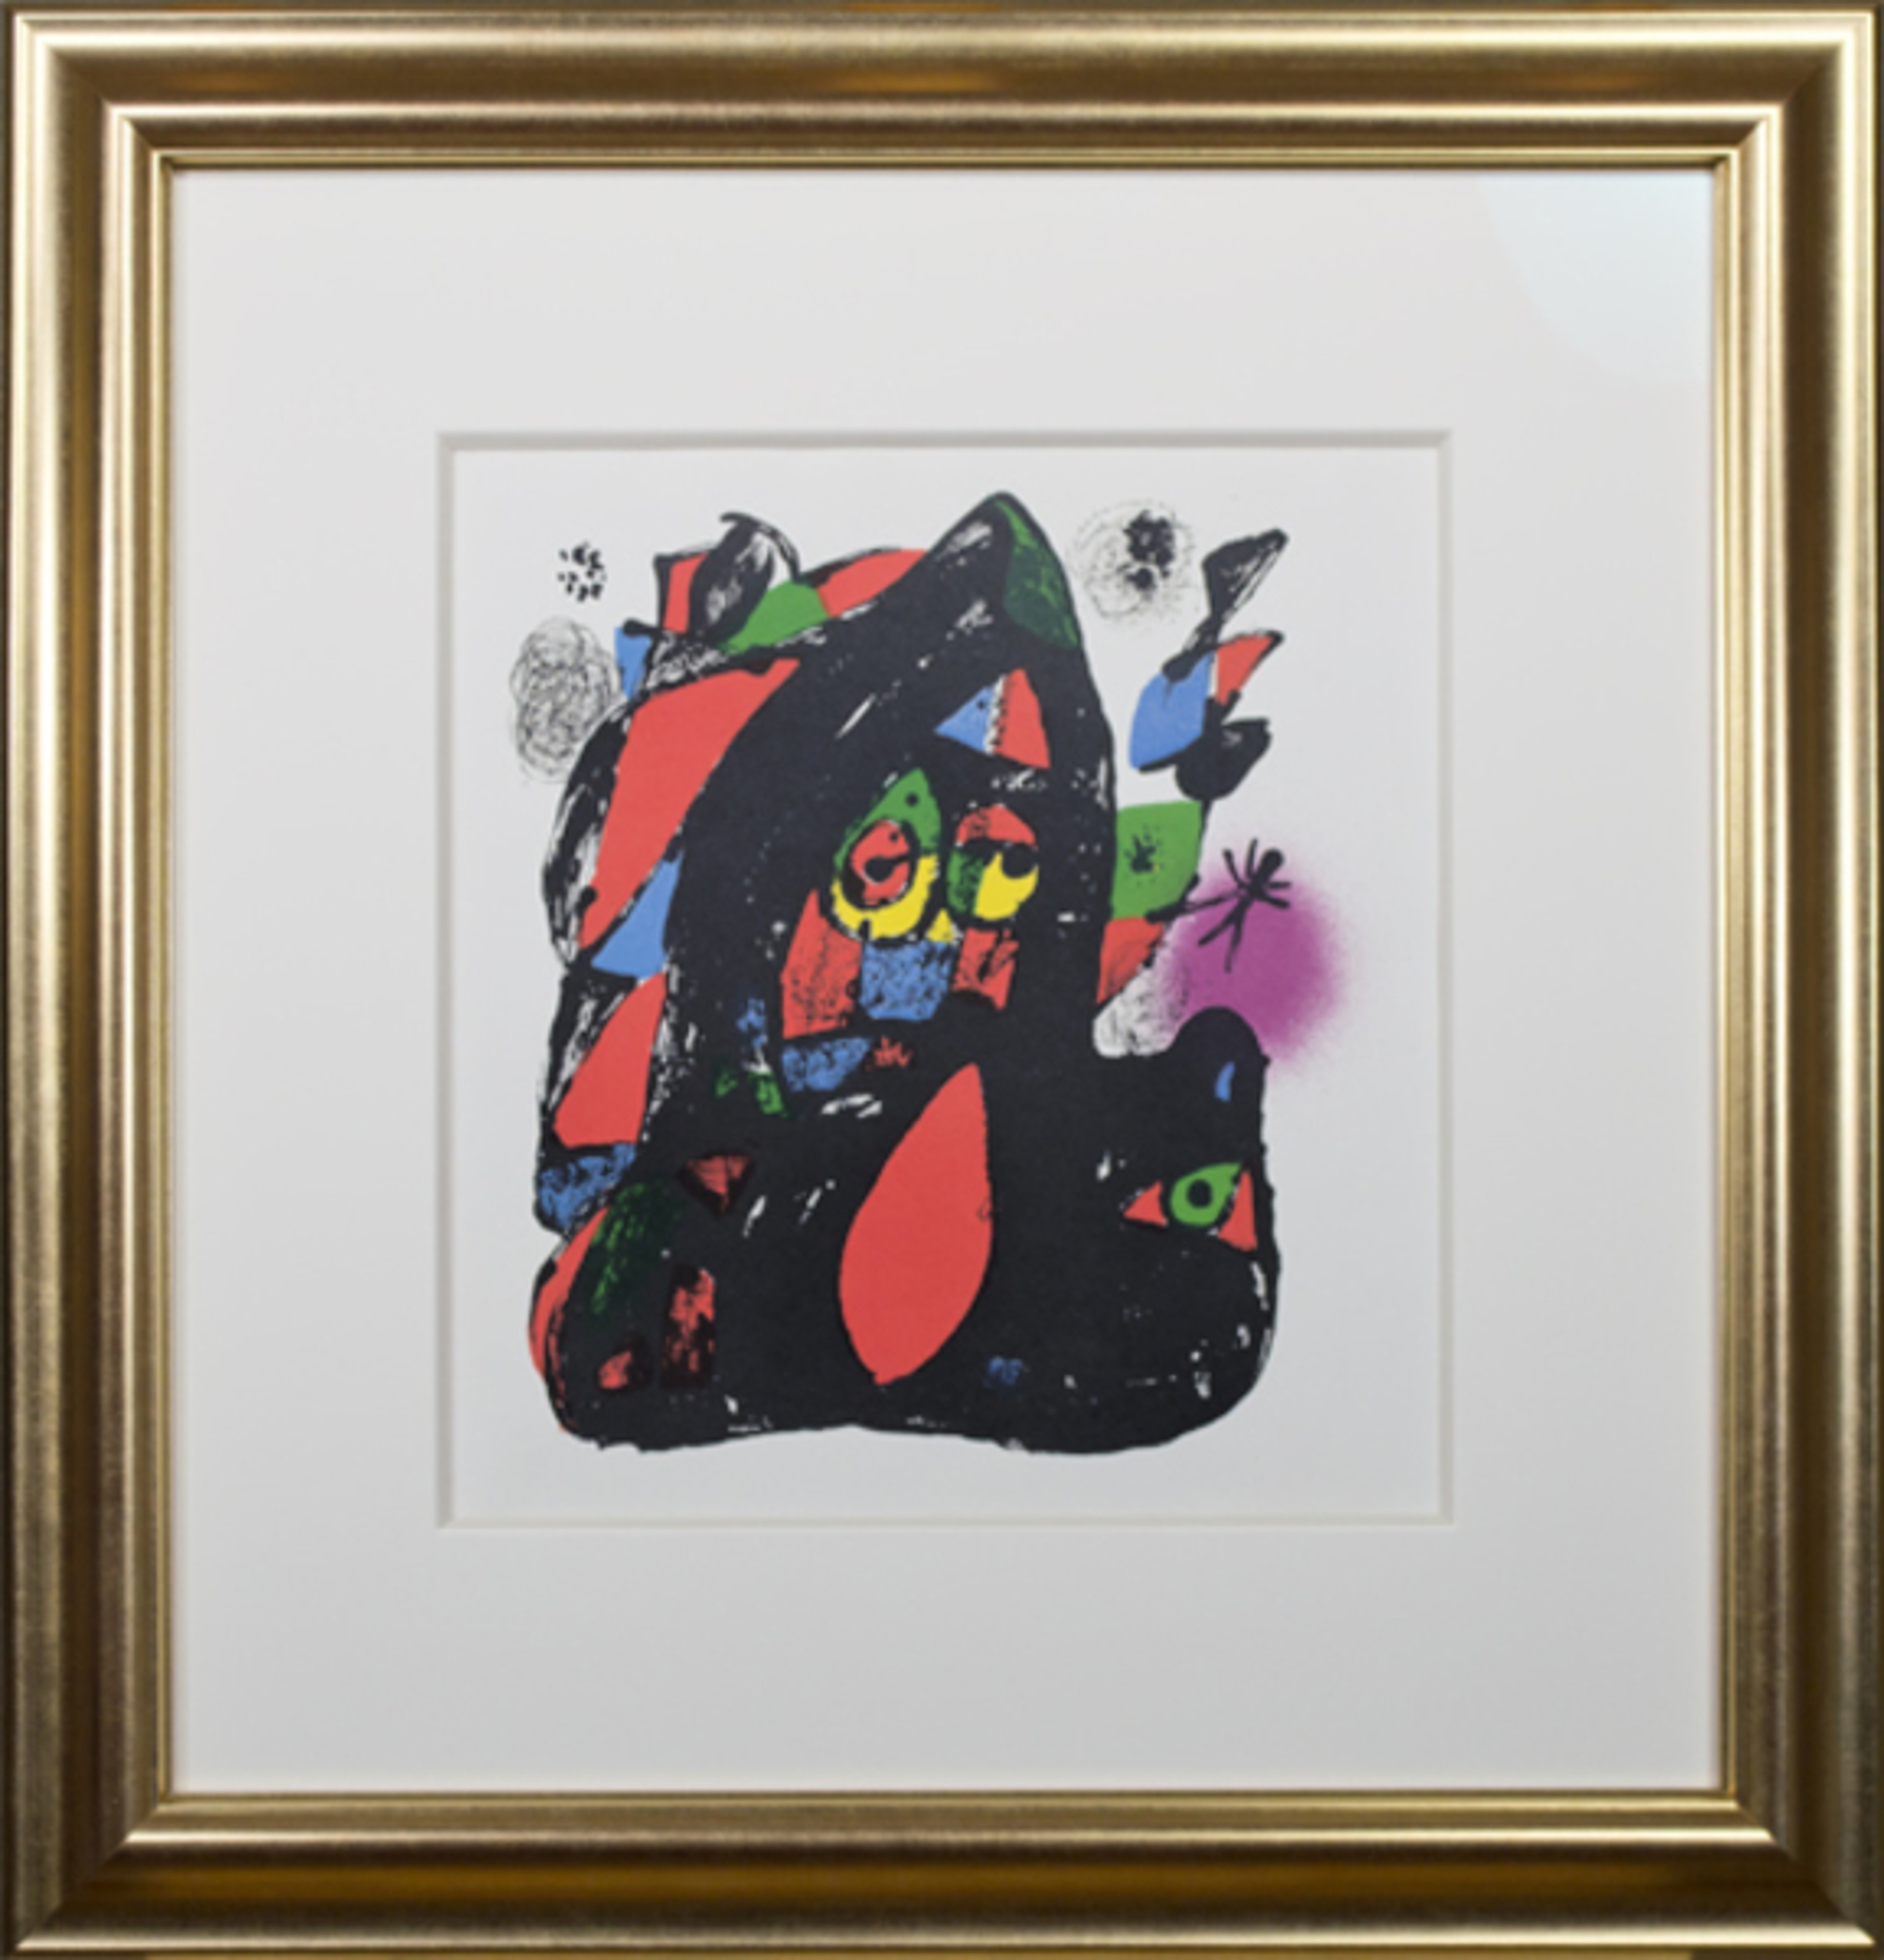 Lithographs IV Cover from "Miro Lithographs IV, Maeght Publisher" by Joan Miró